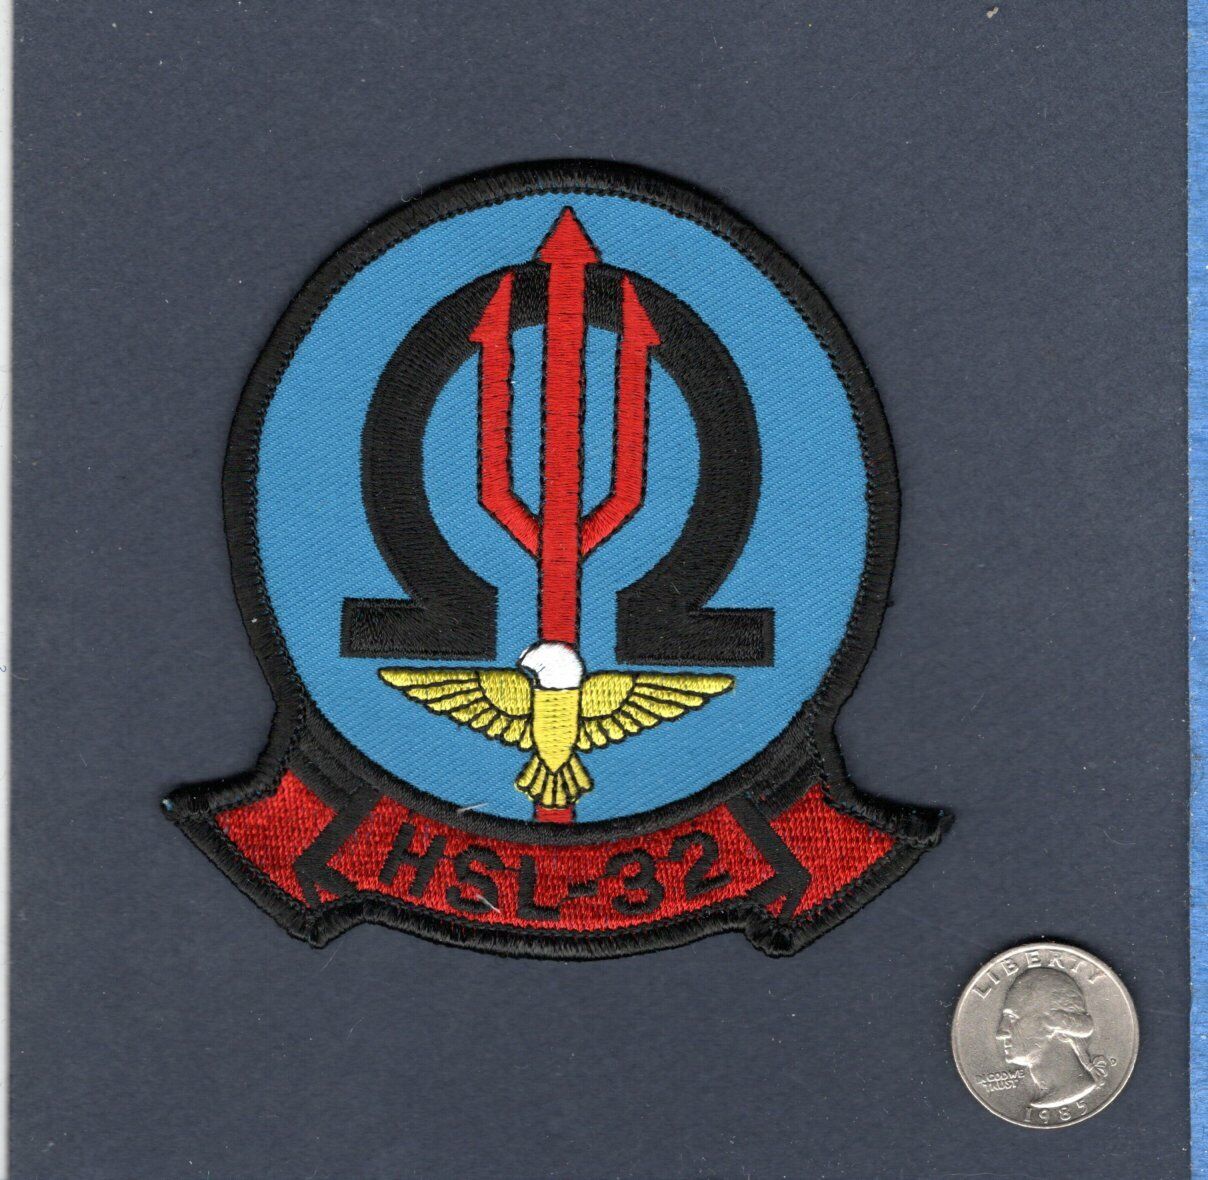 Original HSL-32 INVADERS US NAVY Kaman SH-2 SEA SPRITE Helicopter Squadron Patch